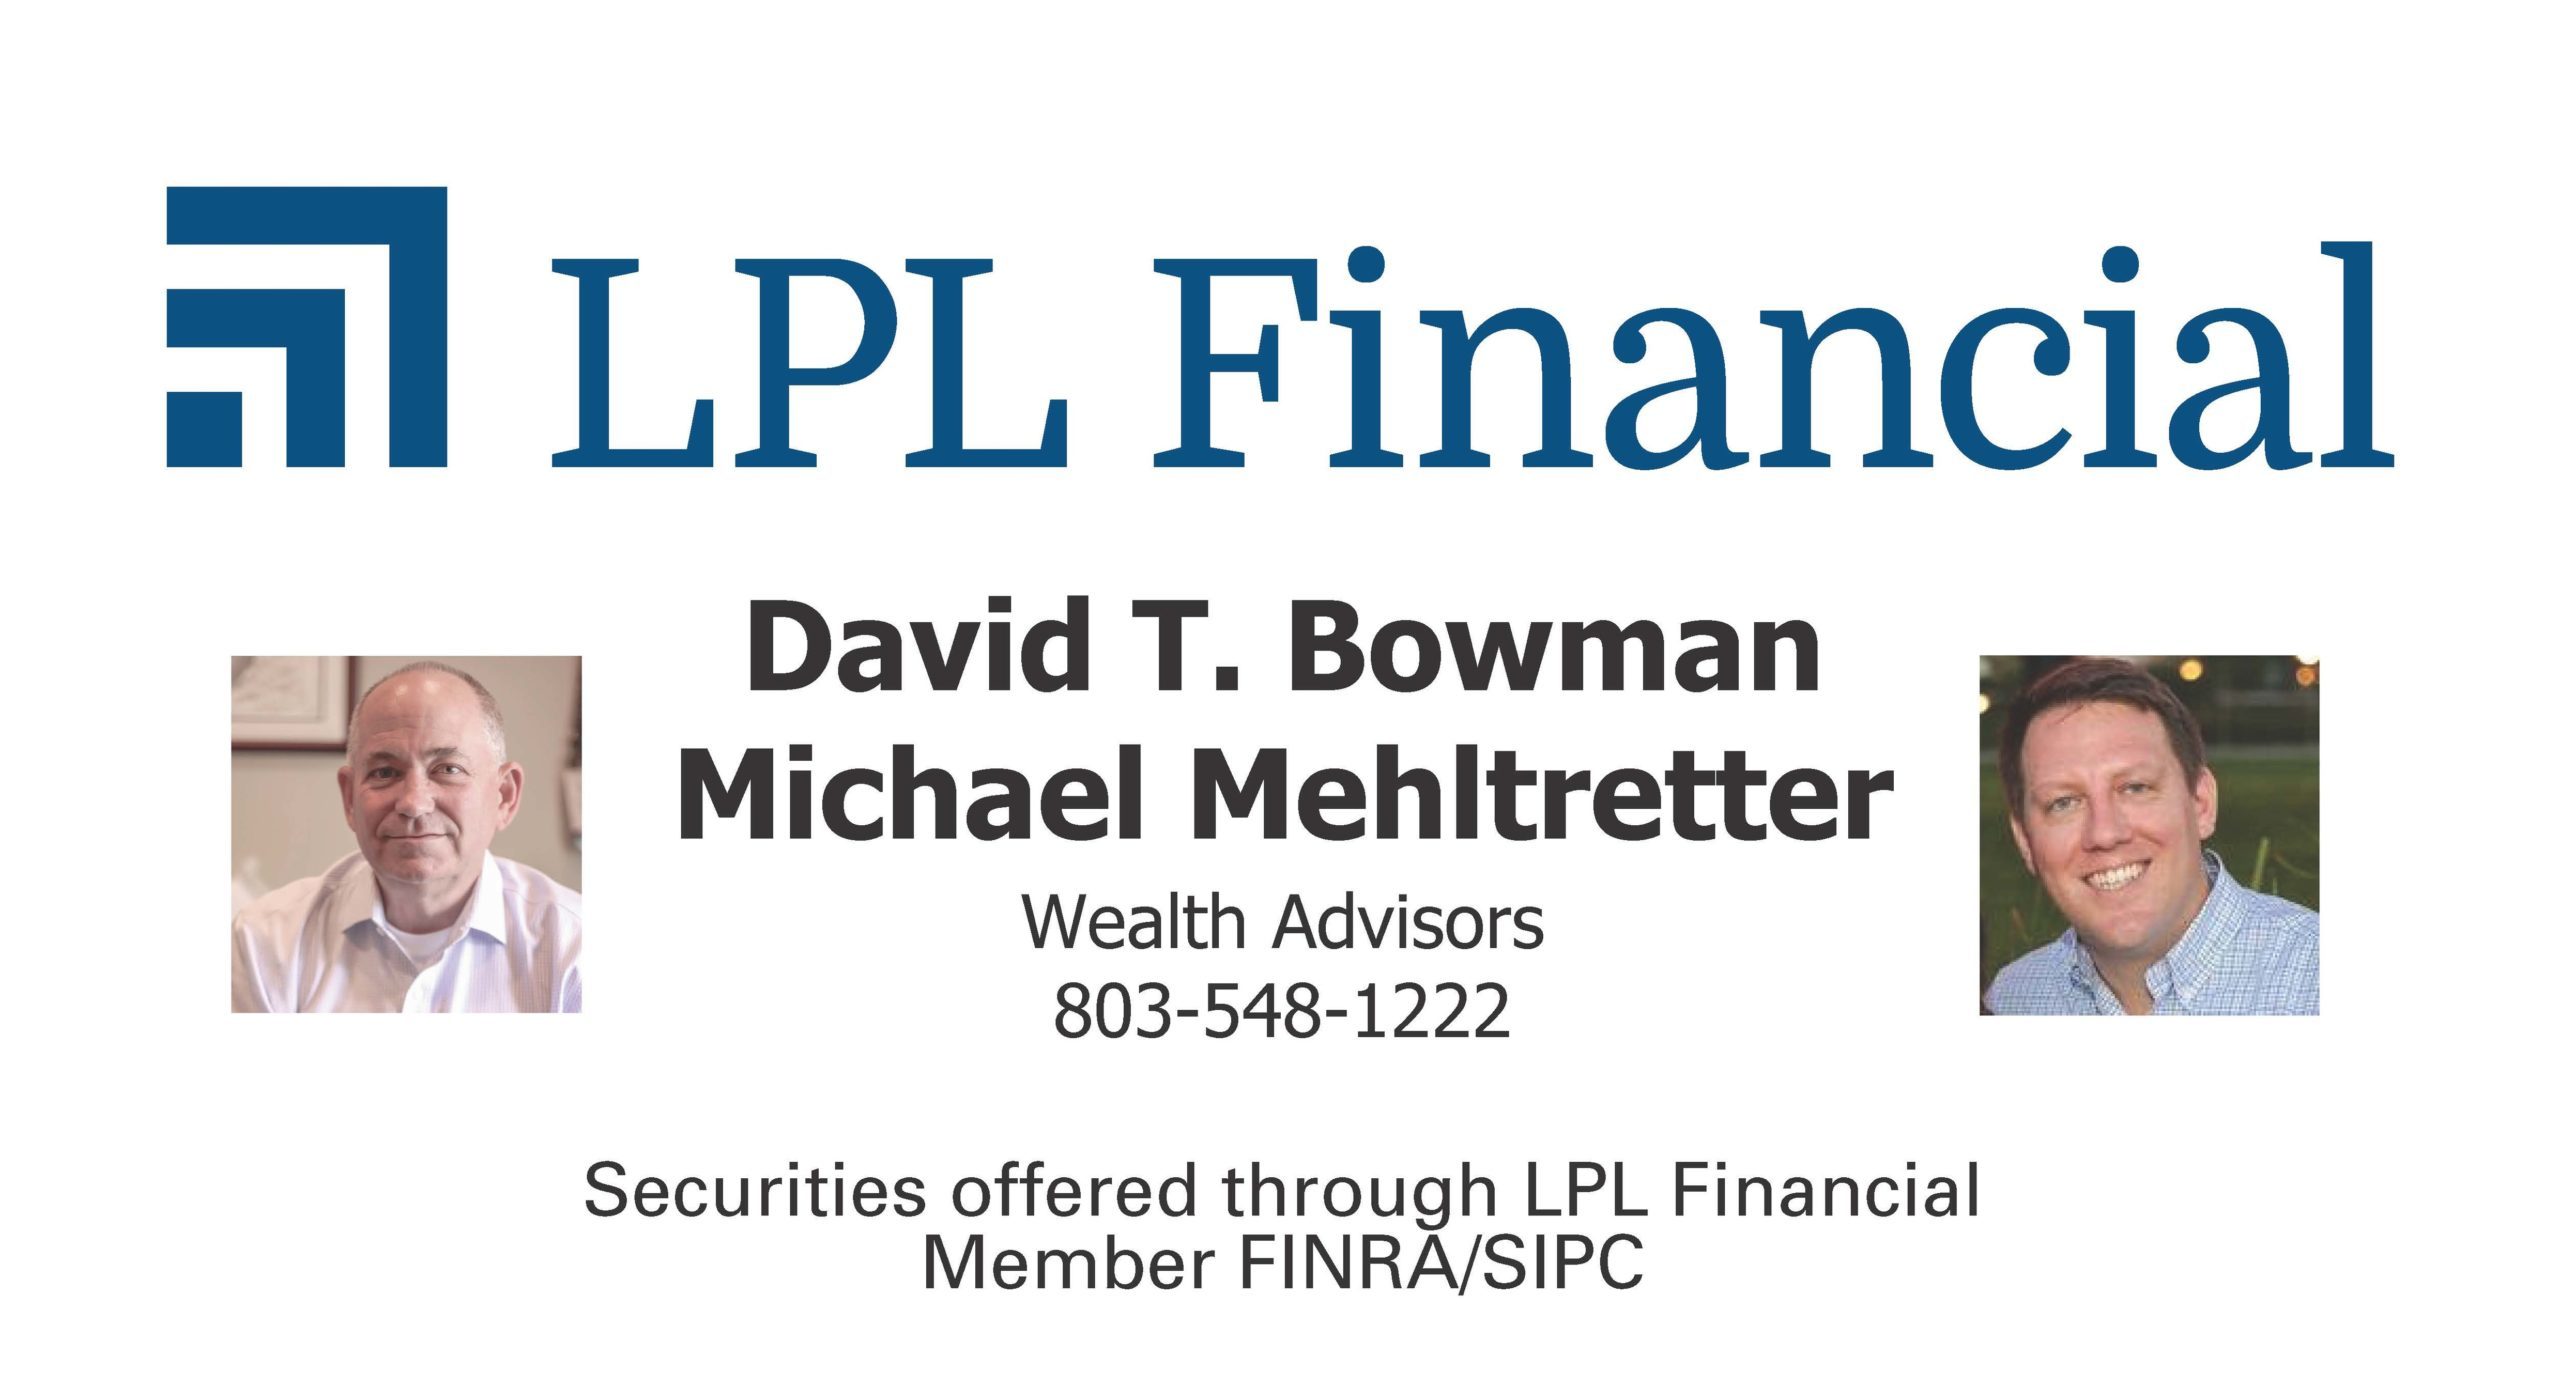 Logo of LPL Financial with photos of Wealth Advisors David T. Bowman and Michael Mehltretter with text reading "803-548-1222 securities offered through LPL Financial Member FINRA/SIPC"